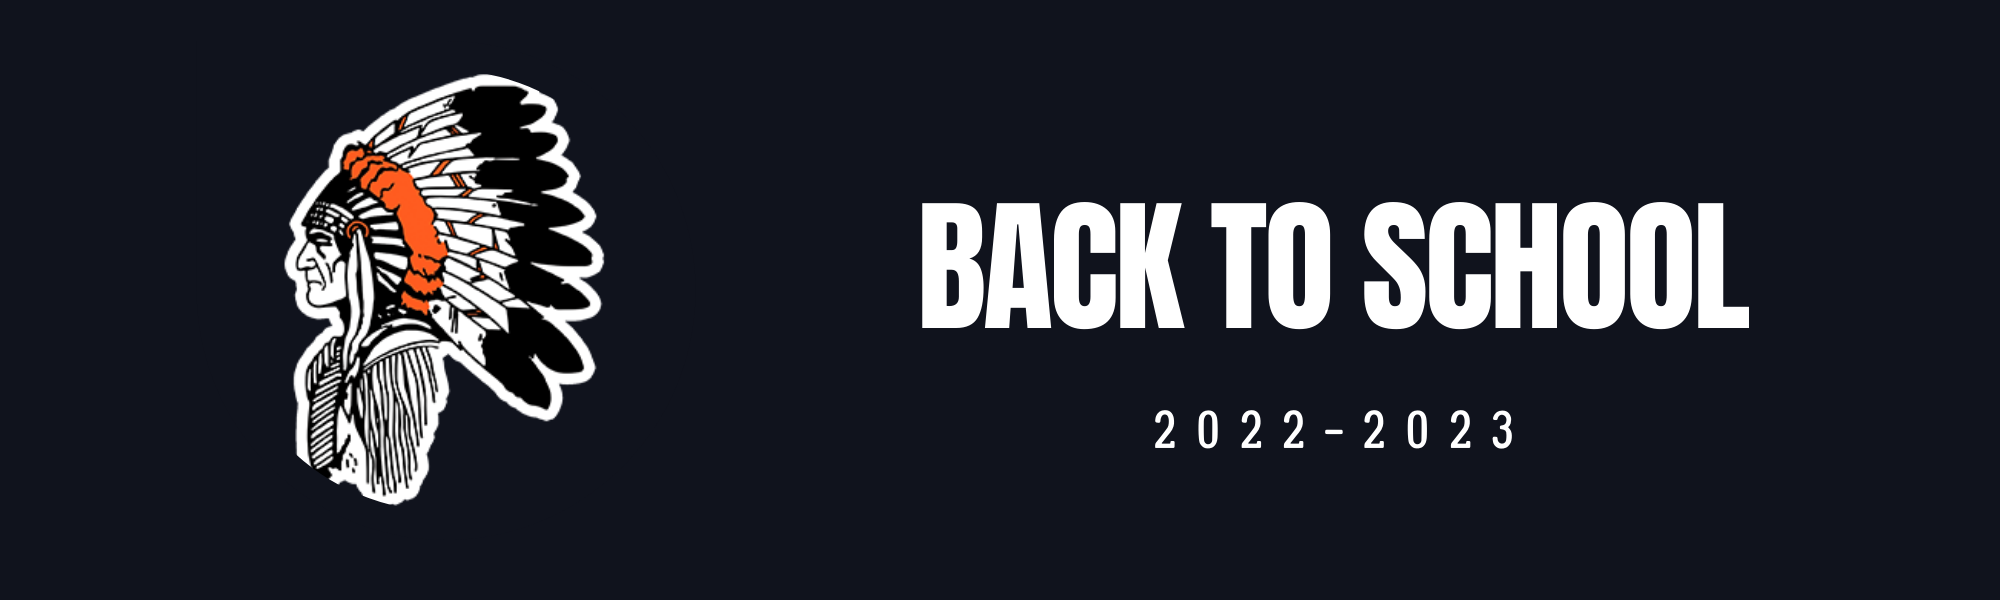 back to school 2022-2023